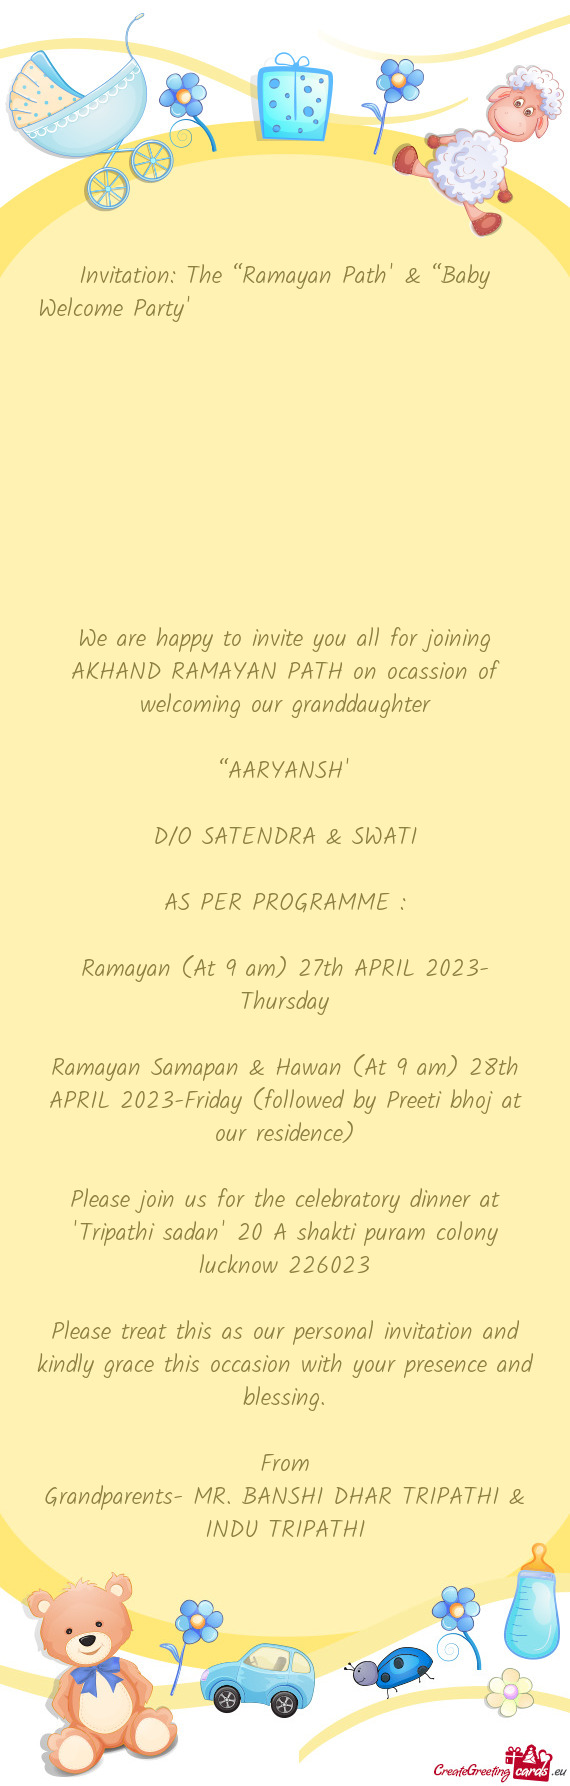 We are happy to invite you all for joining AKHAND RAMAYAN PATH on ocassion of welcoming our granddau